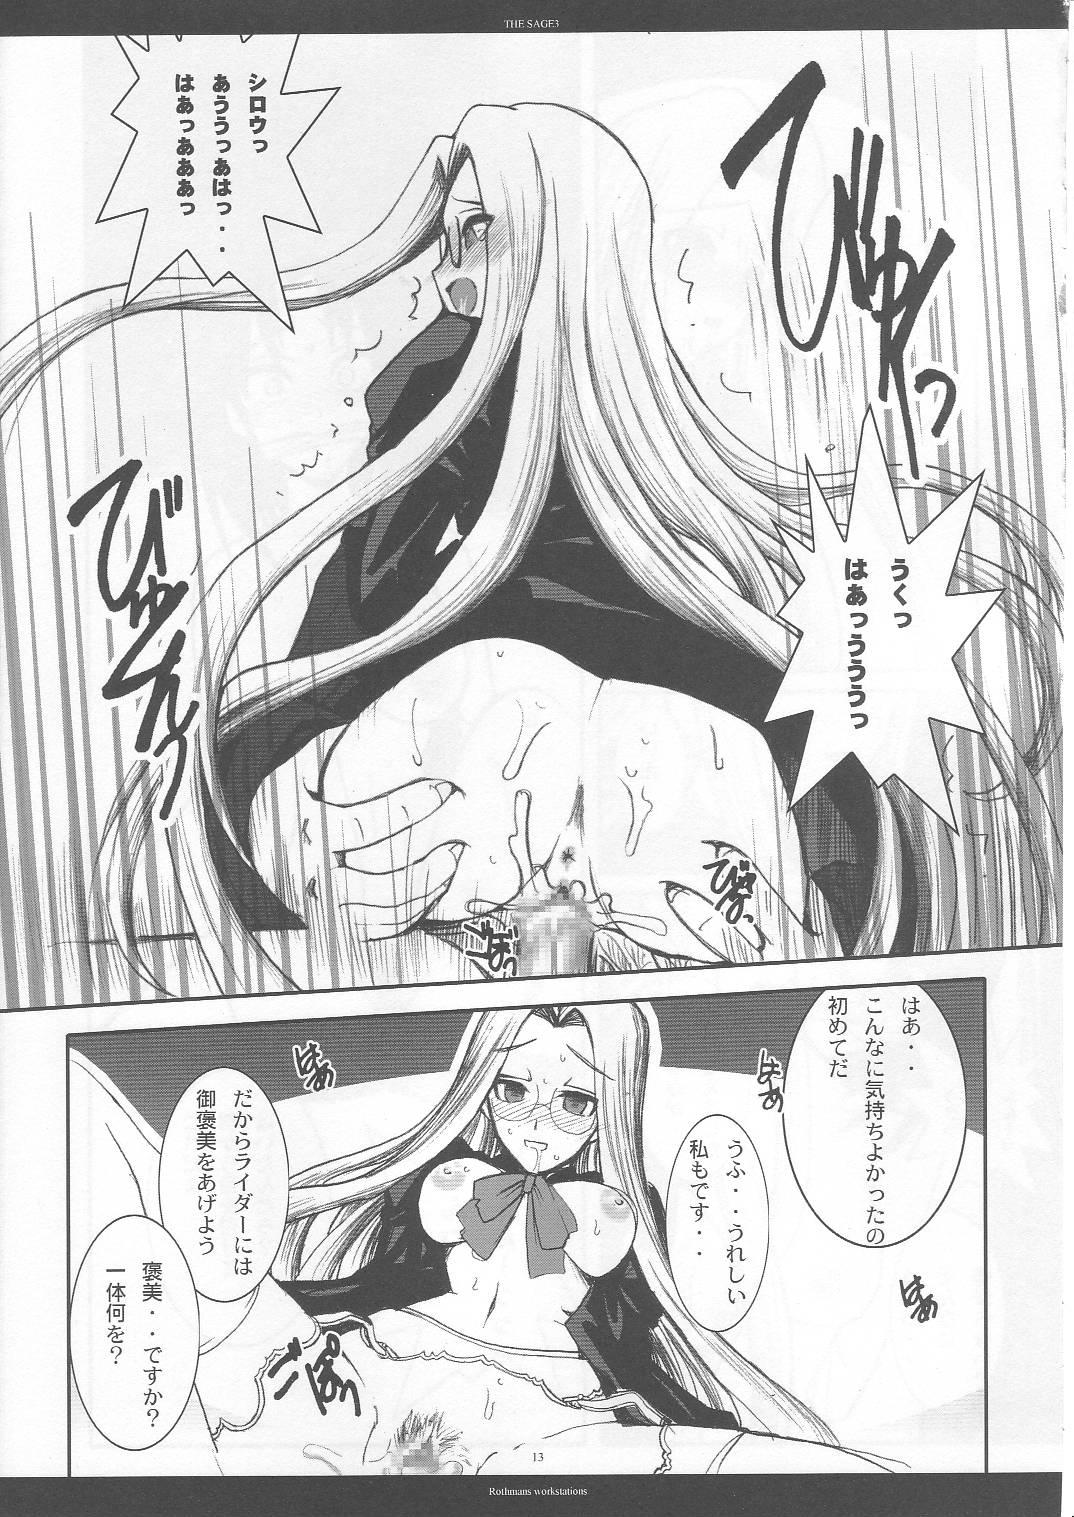 Orgasmus THE SAGE 3 - Fate stay night Bigbutt - Page 12